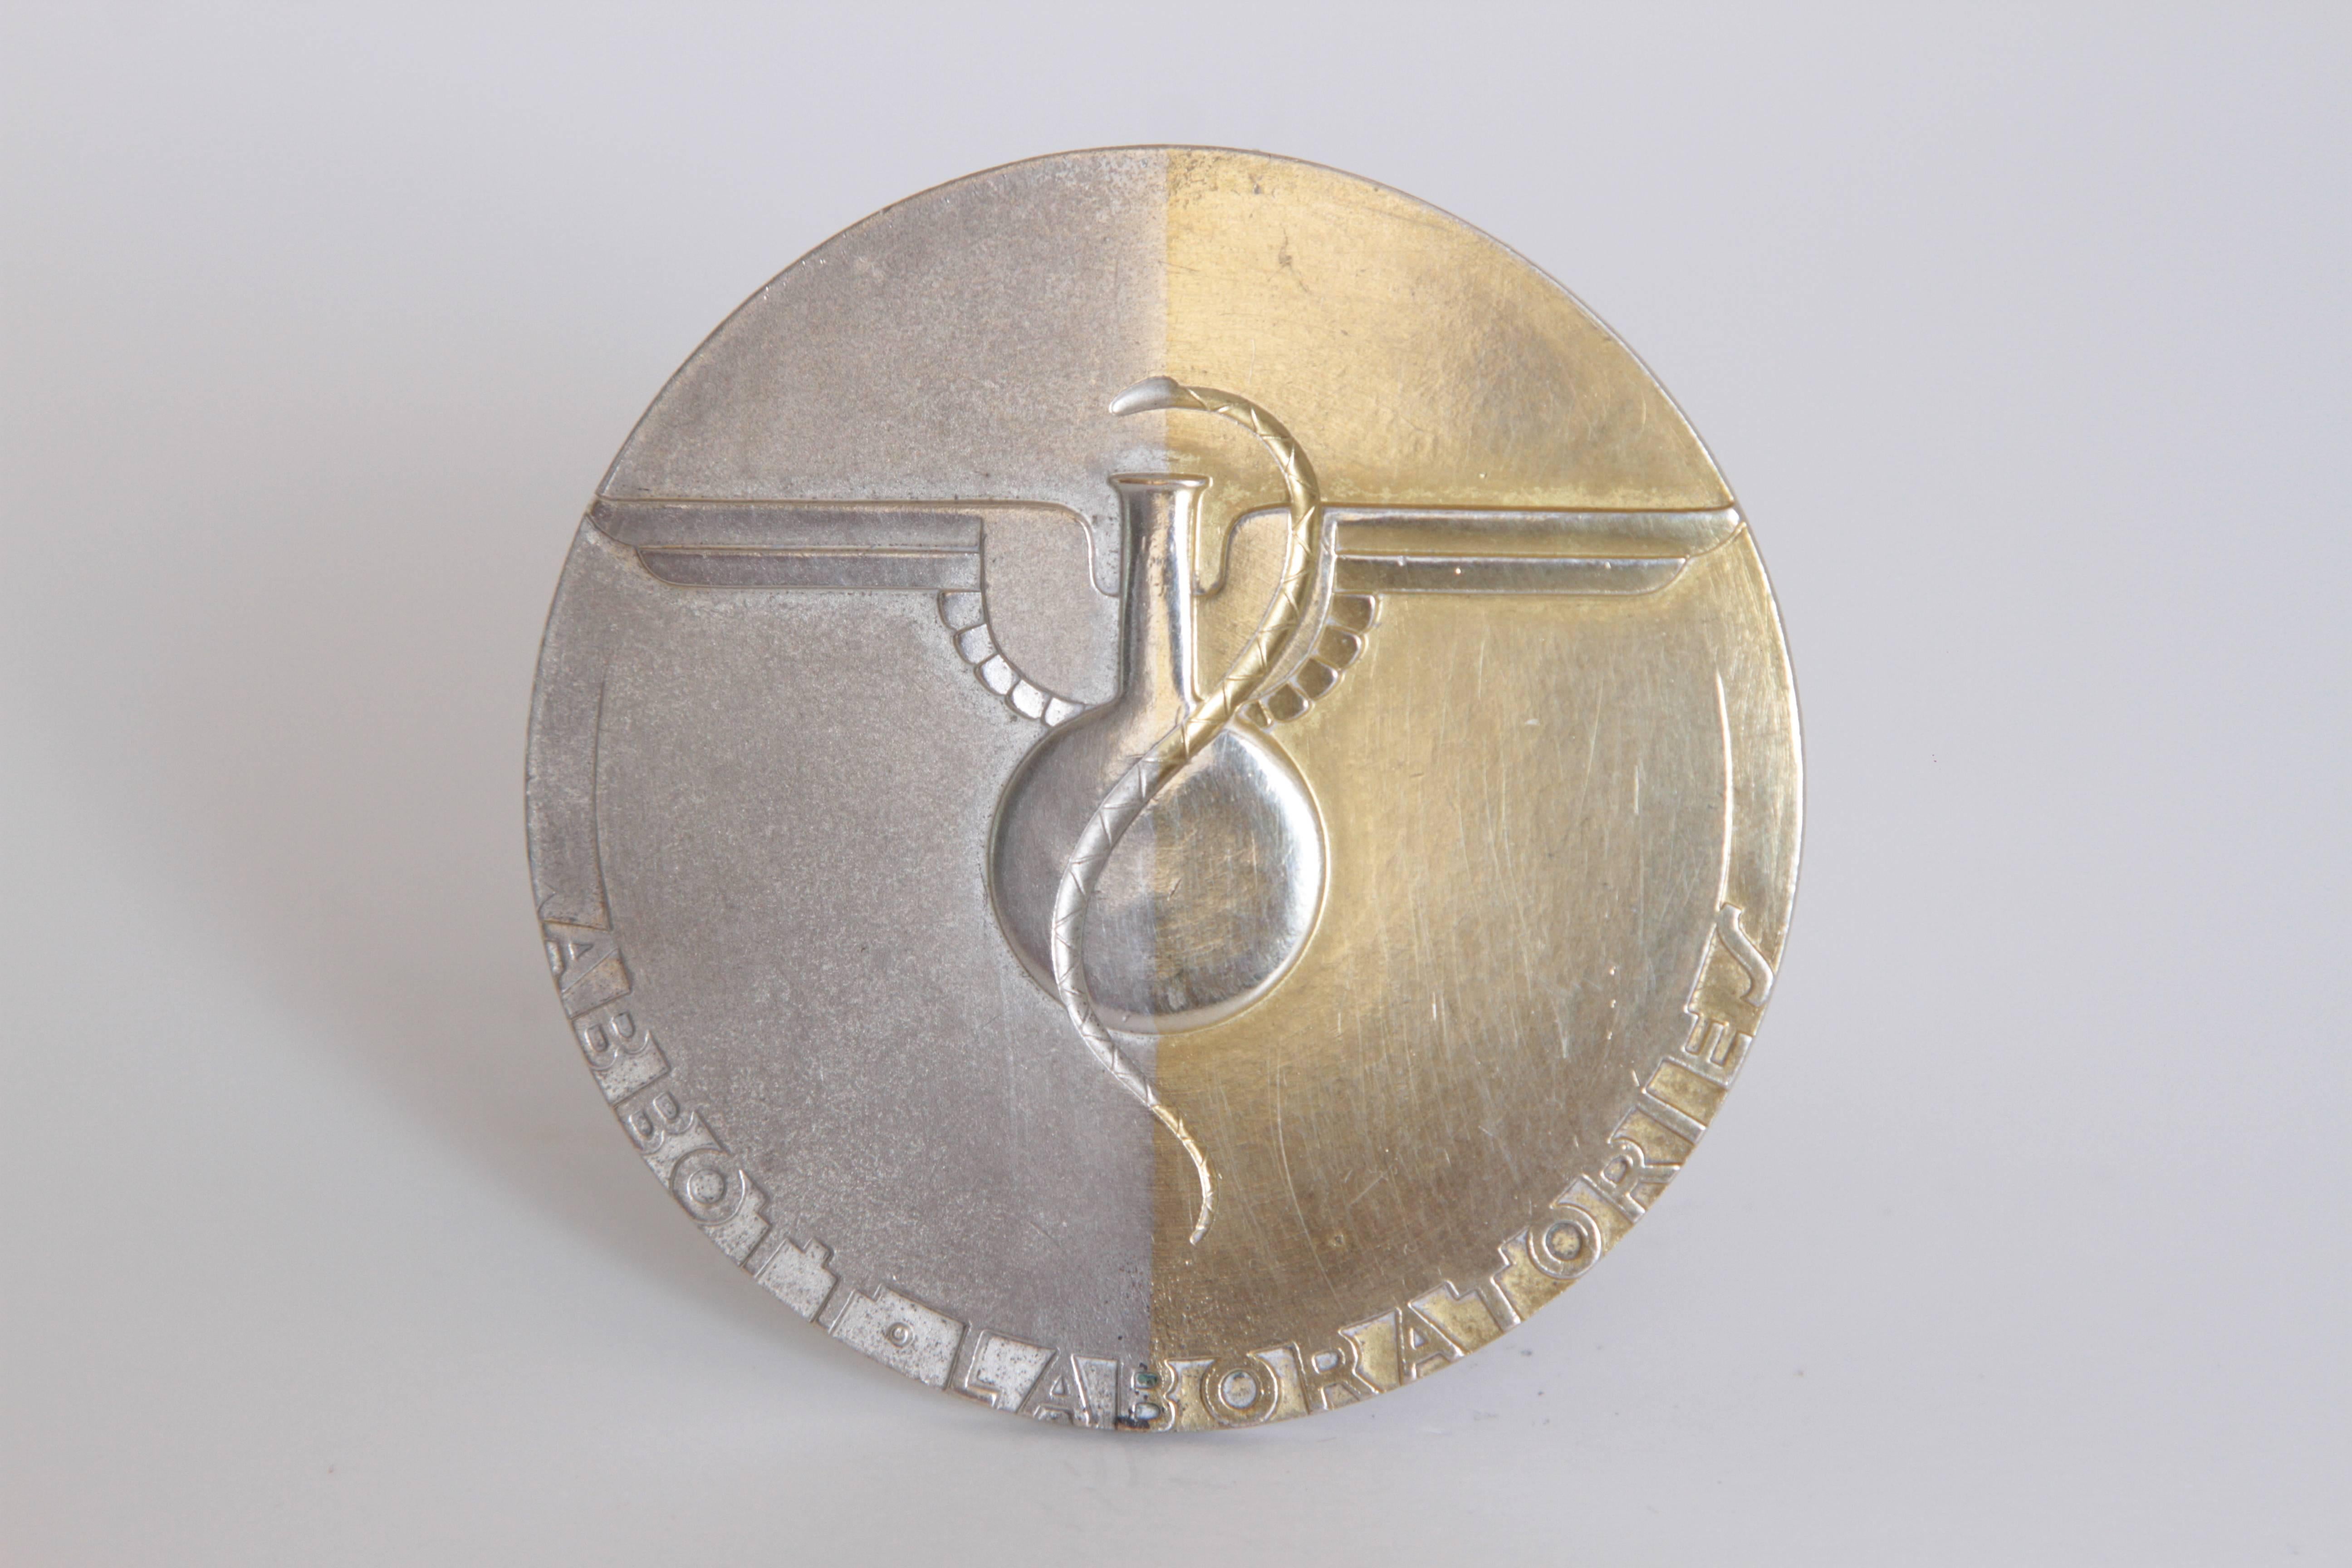 Machine Age Art Deco Raymond Loewy Medallion, Abbott Labs 50th Anniversary

A difficult to source medallion, designed by Loewy and executed by Rene Chambellan for Medallic Arts, with two-tone plated finish.  Loewy's sole medallic design.

The